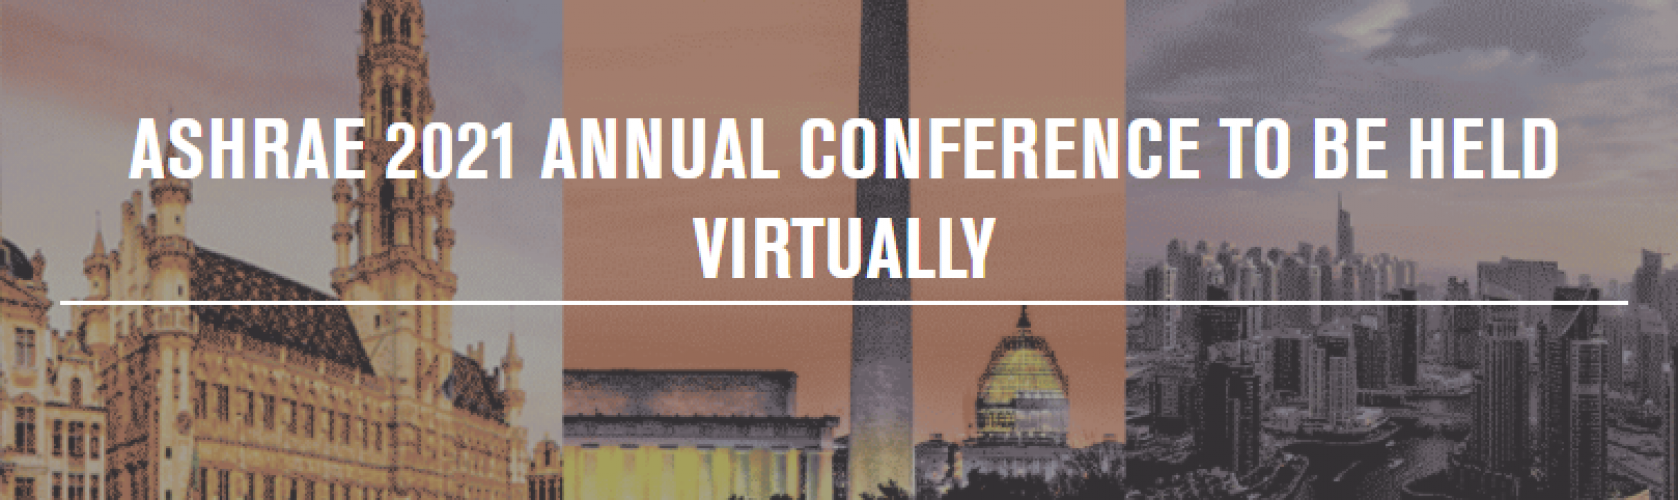 ashrae-2021-annual-conference-to-be-held-virtually